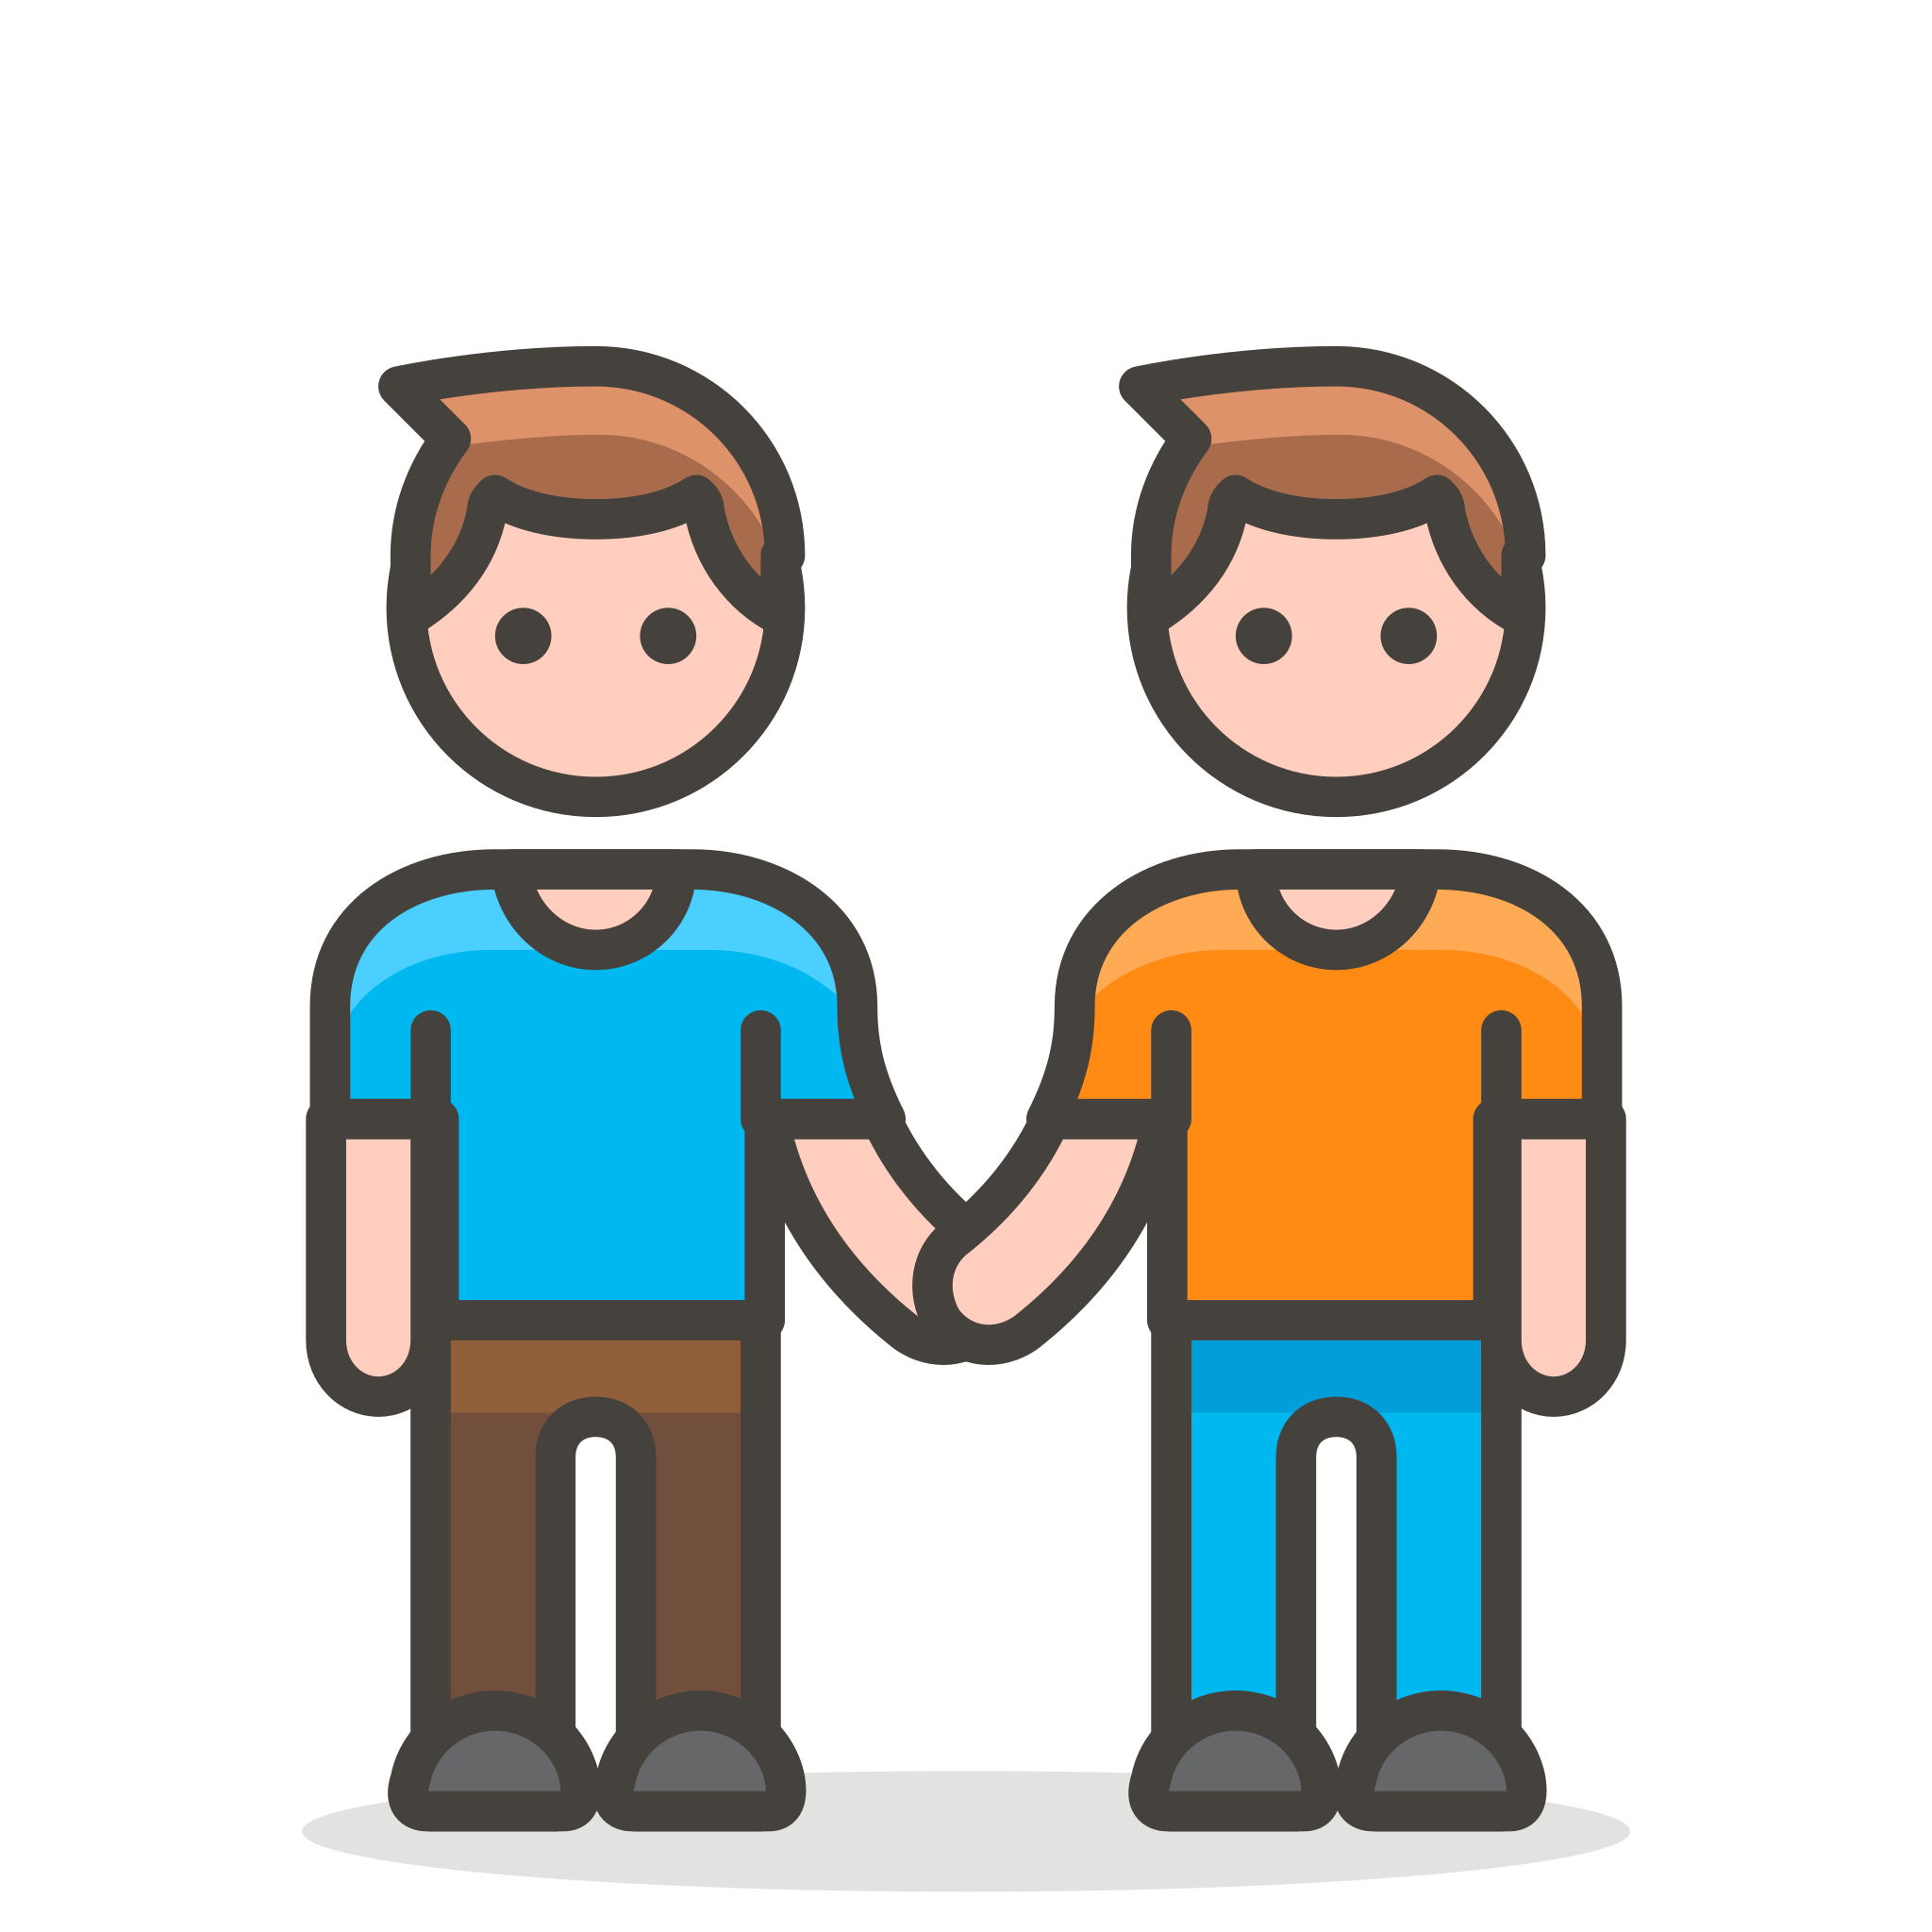 A handshake or two people holding hands.